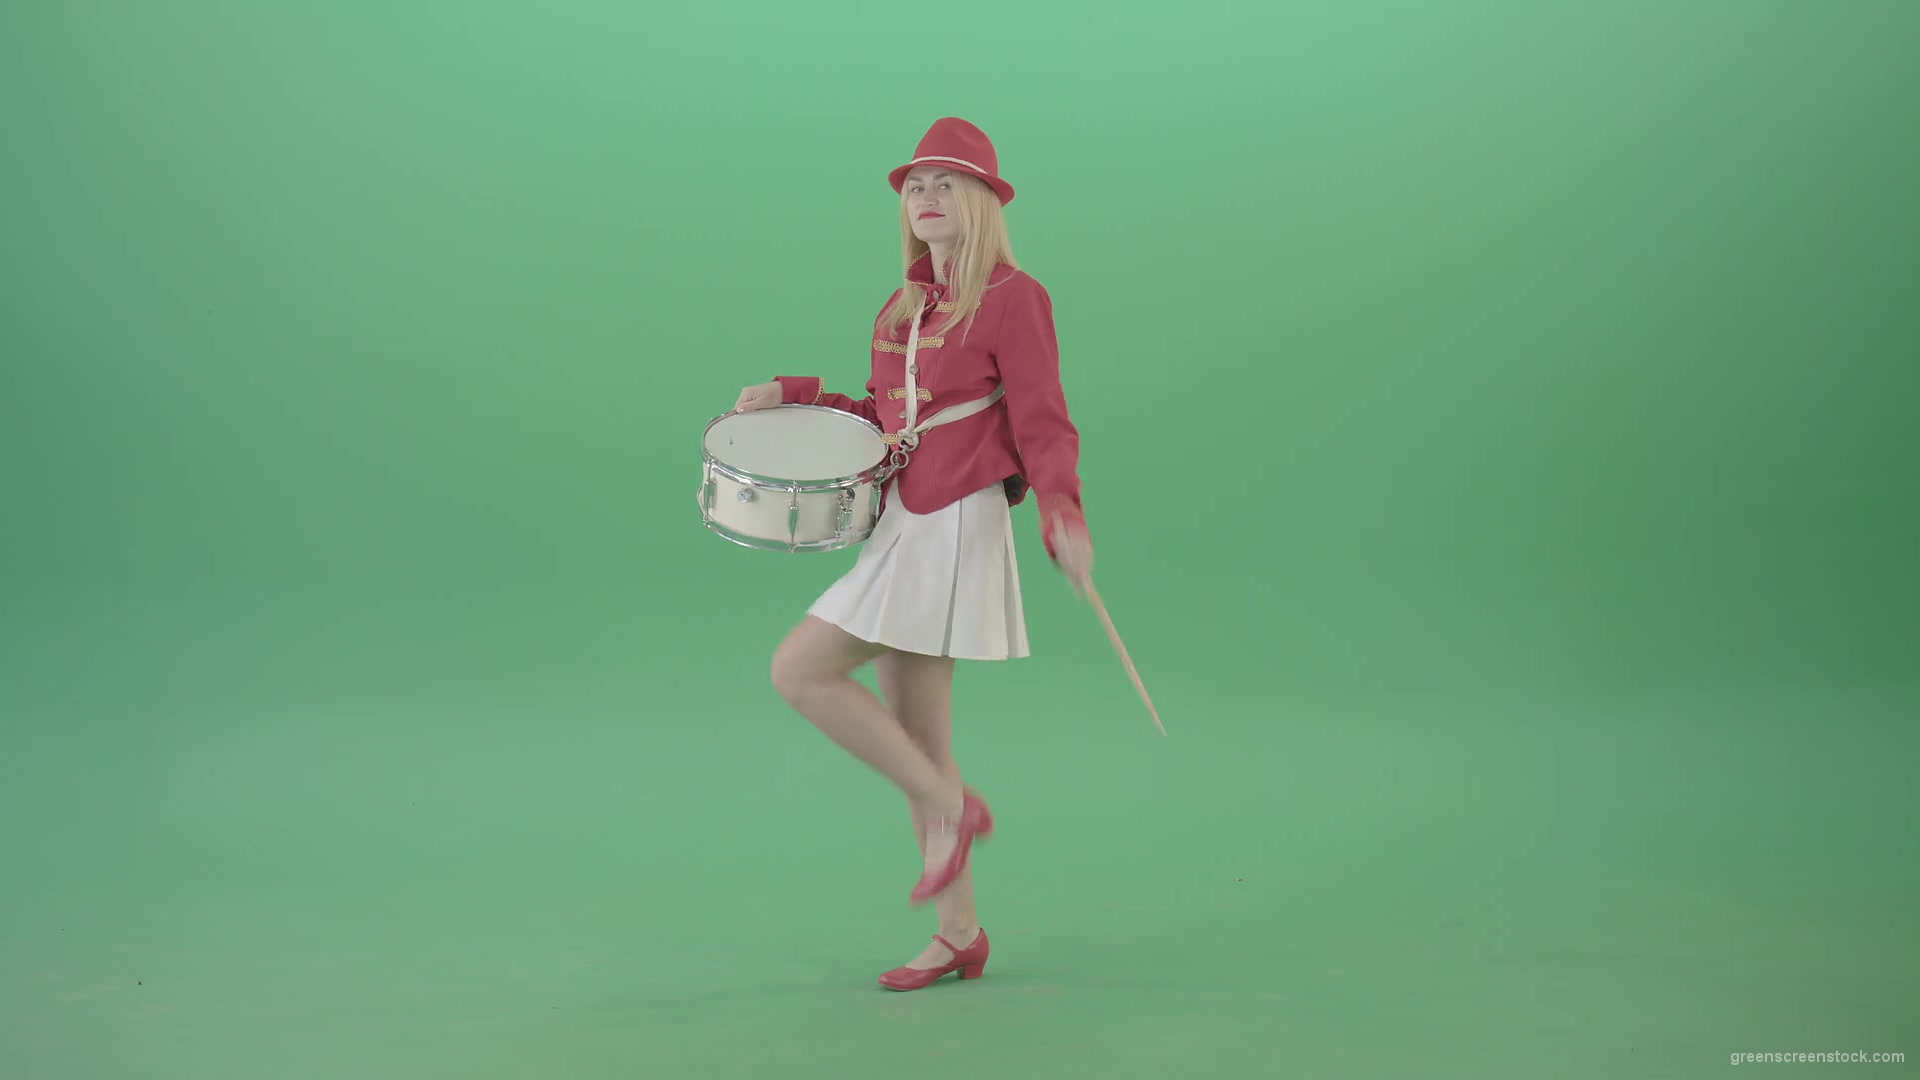 Girl-in-red-uniform-marching-and-play-snare-drum-on-green-screen-4K-Video-Footage-1920_009 Green Screen Stock